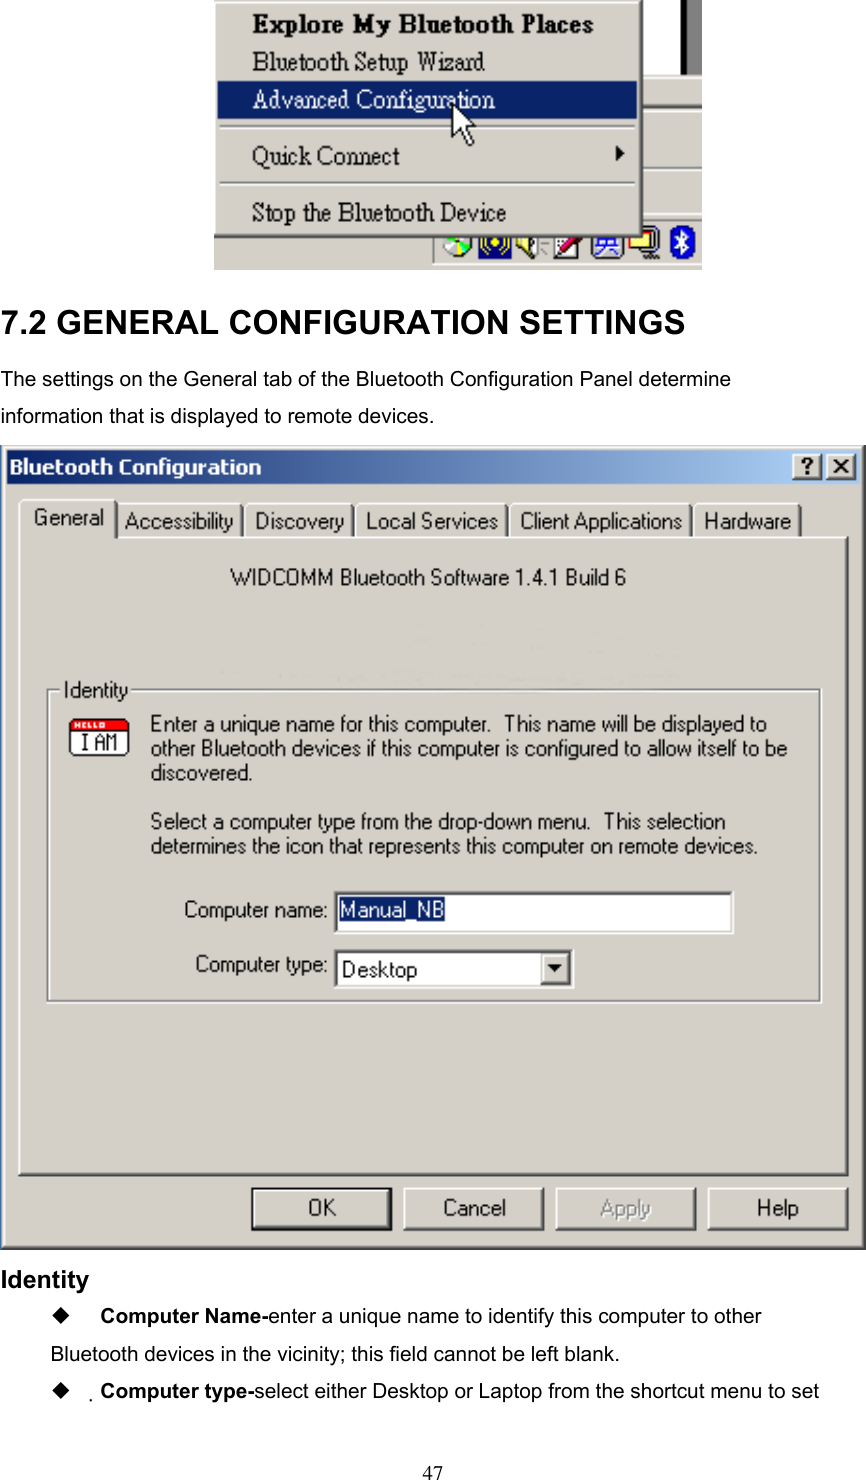  7.2 GENERAL CONFIGURATION SETTINGS The settings on the General tab of the Bluetooth Configuration Panel determine information that is displayed to remote devices.  Identity   Computer Name-enter a unique name to identify this computer to other Bluetooth devices in the vicinity; this field cannot be left blank.   Computer type-select either Desktop or Laptop from the shortcut menu to set  47 